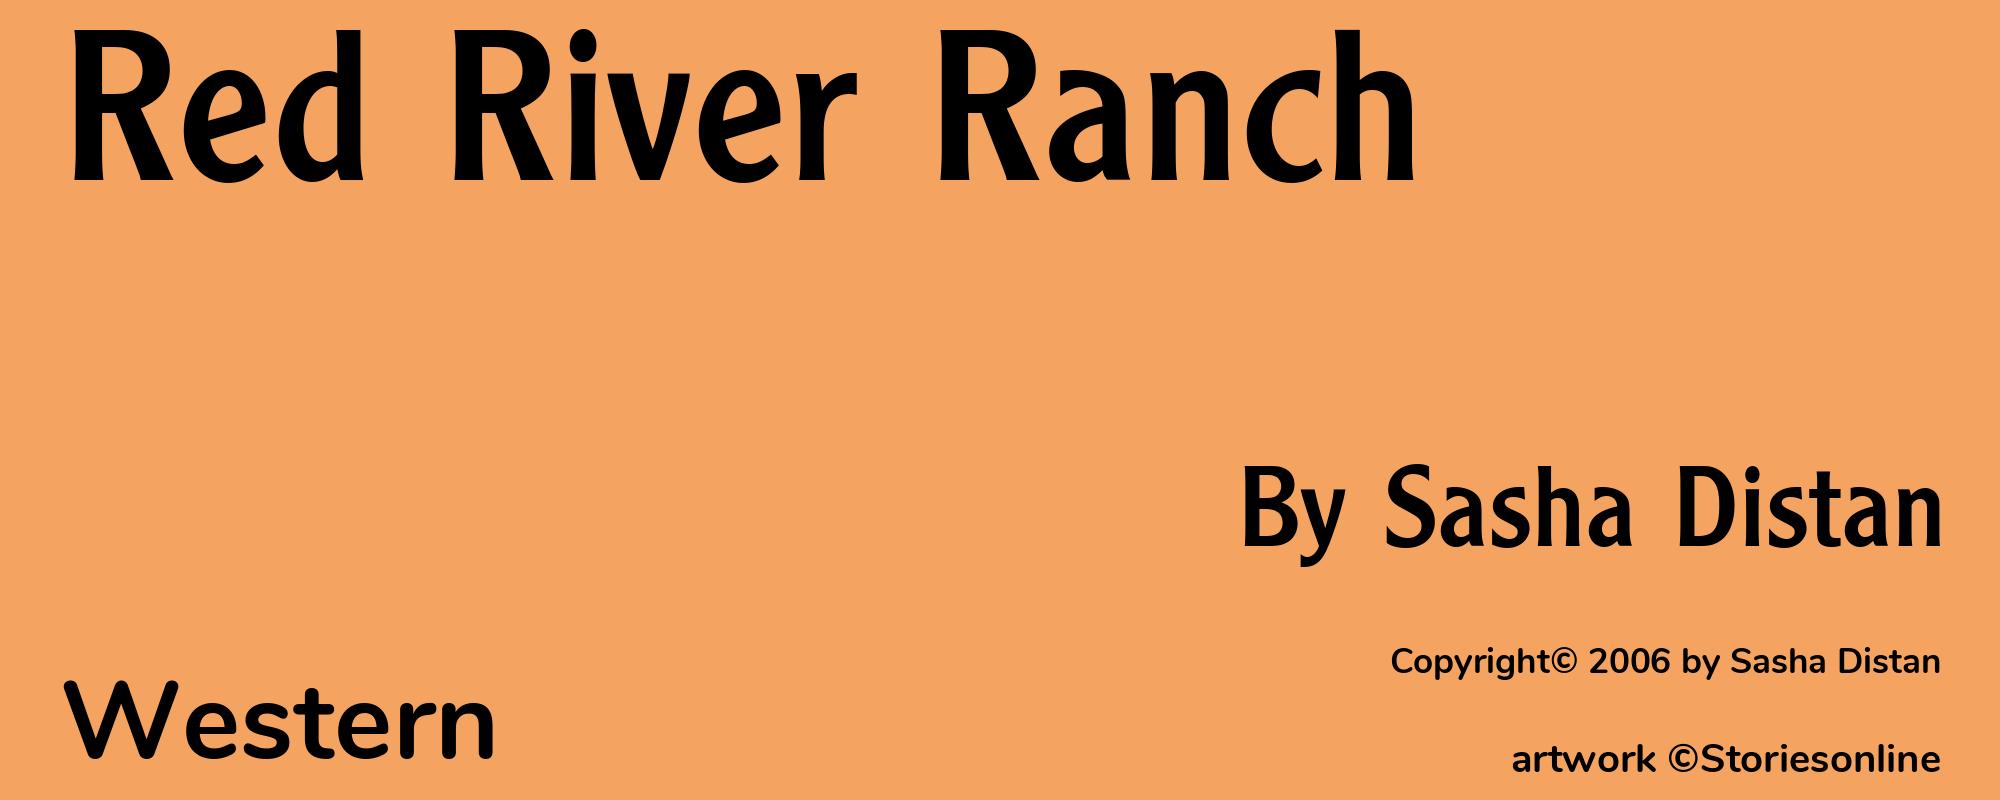 Red River Ranch - Cover